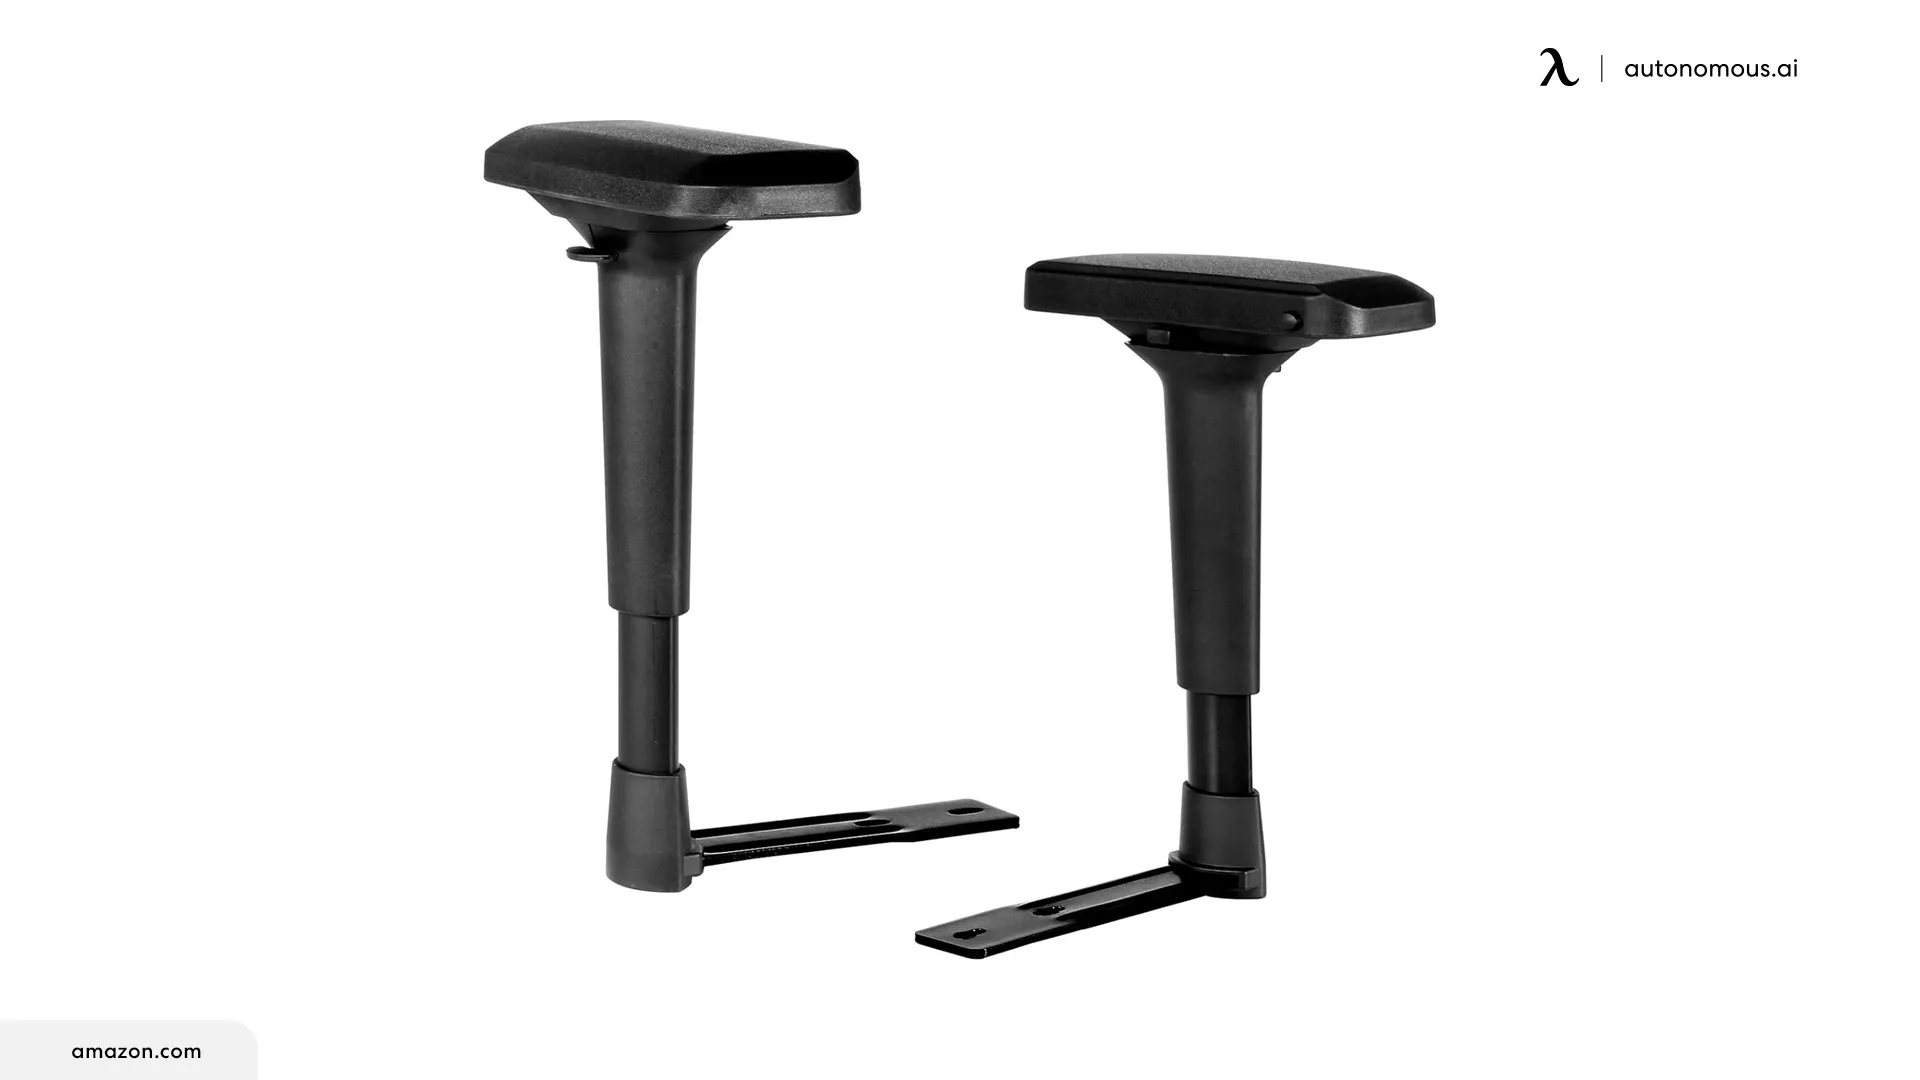 Skuehod Height Adjustable Chair Arms